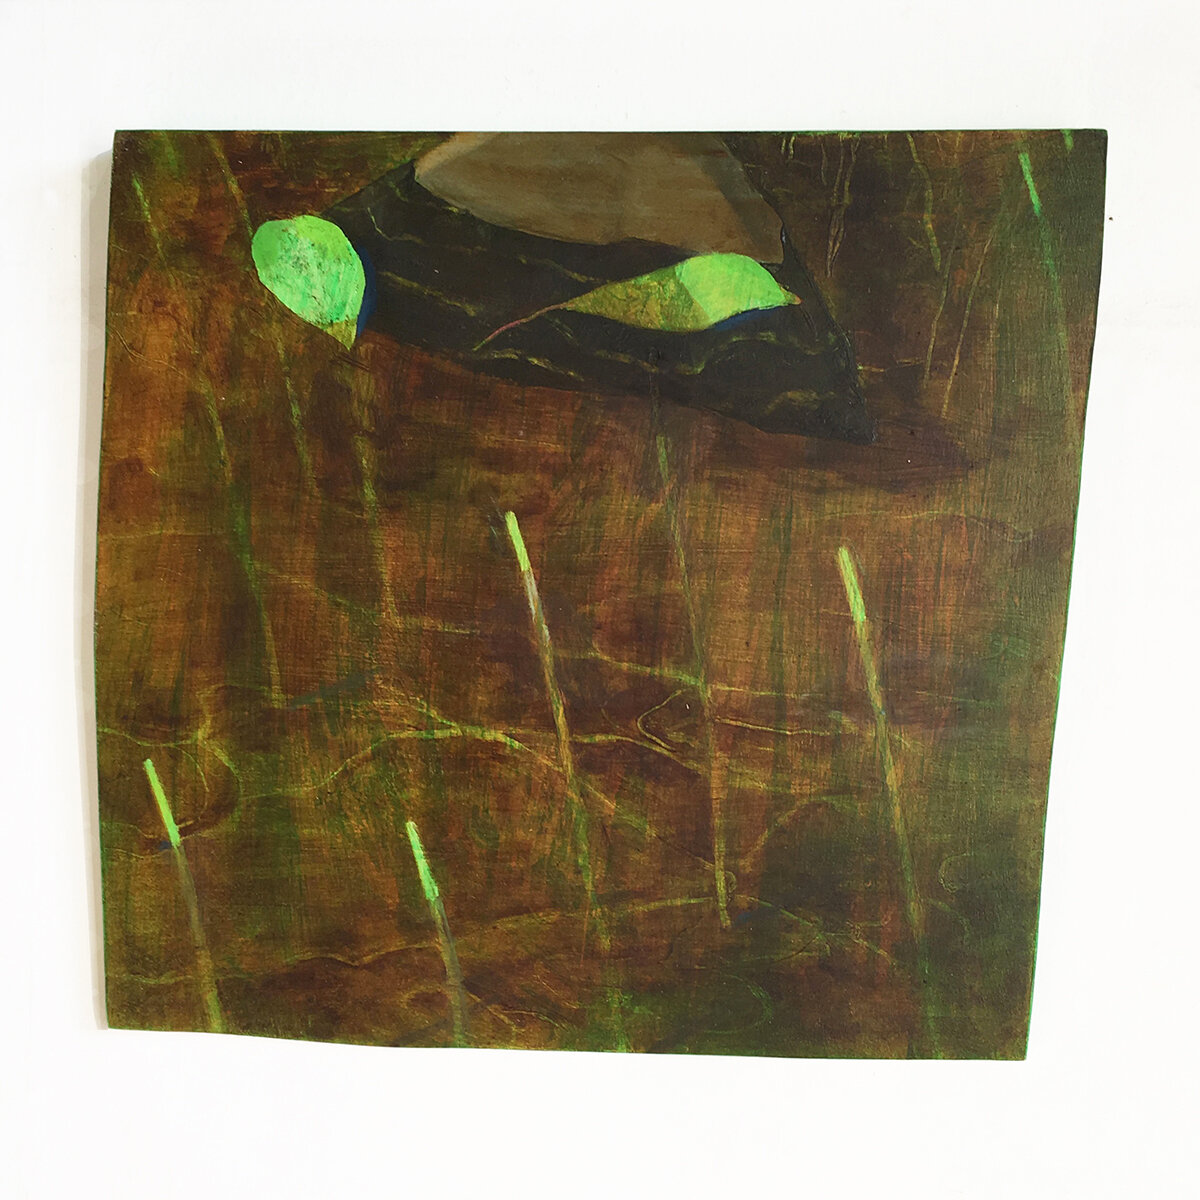   Study for Pond on Wheels XIX   Oil on wood   13  x 13 ½  x 1 inches   32 x 34  x 2 ½ cm 2020 